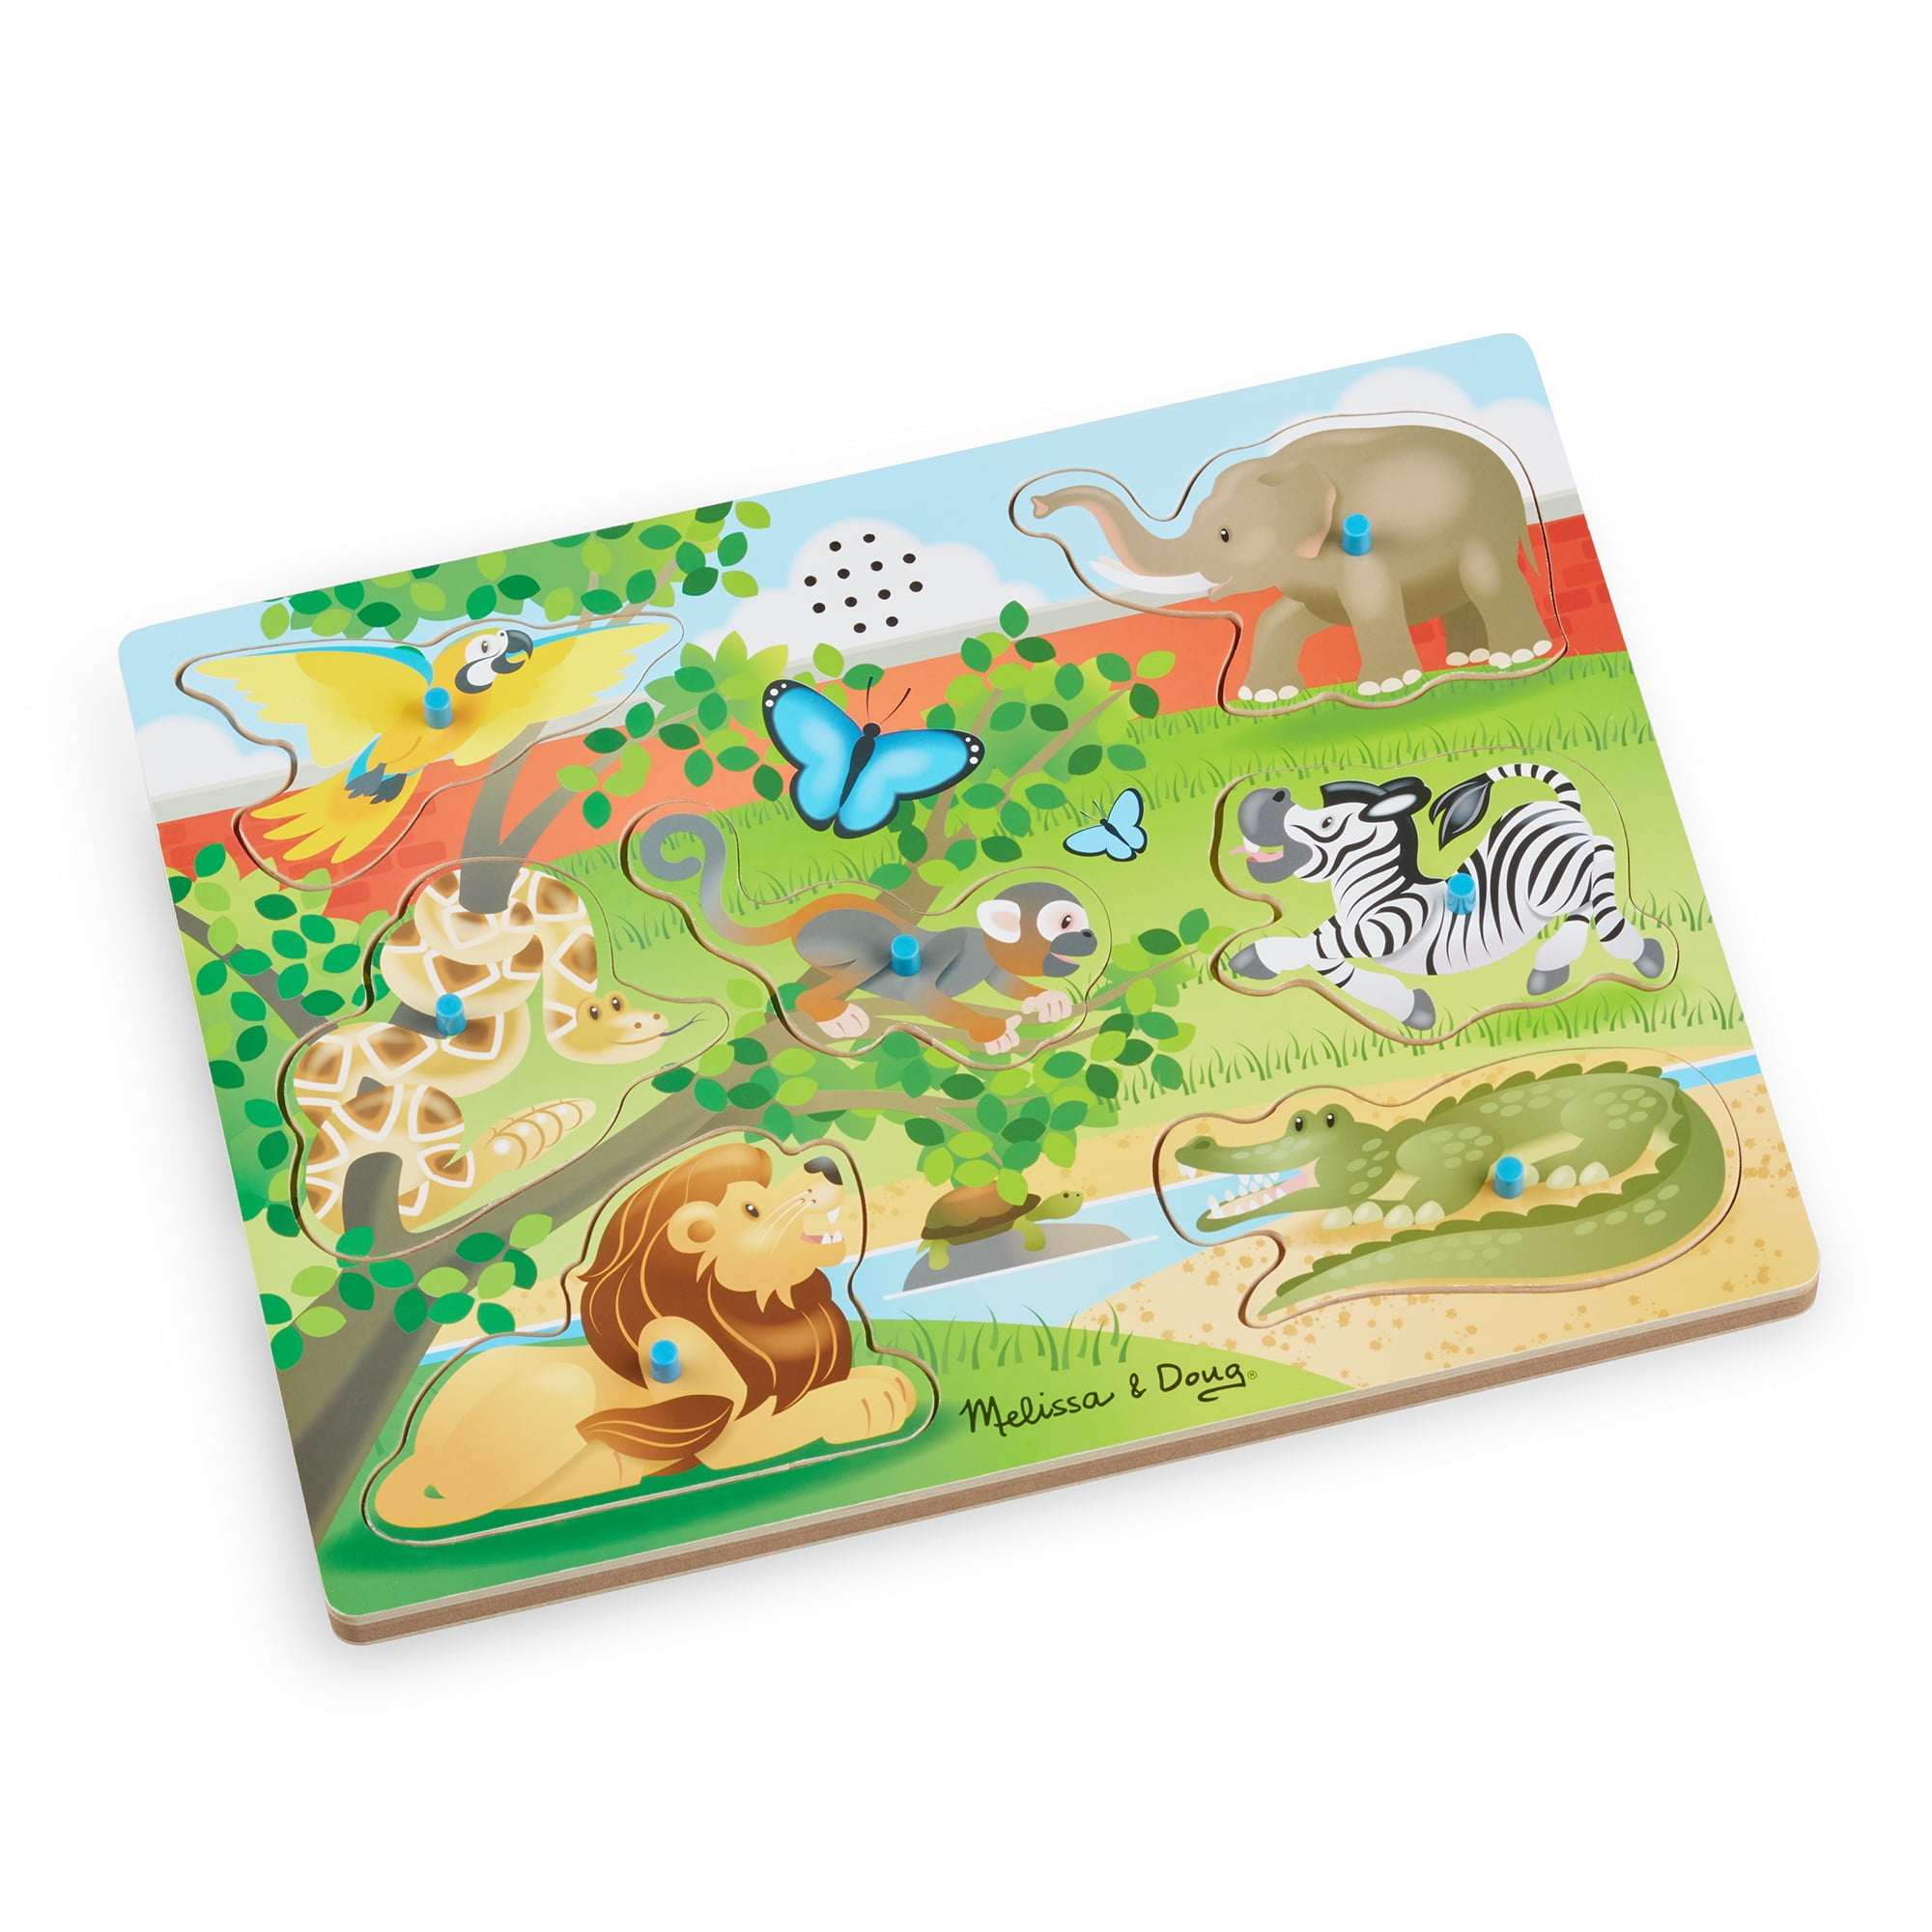 Melissa & Doug Wooden 7-Piece At the Zoo Sound Puzzle